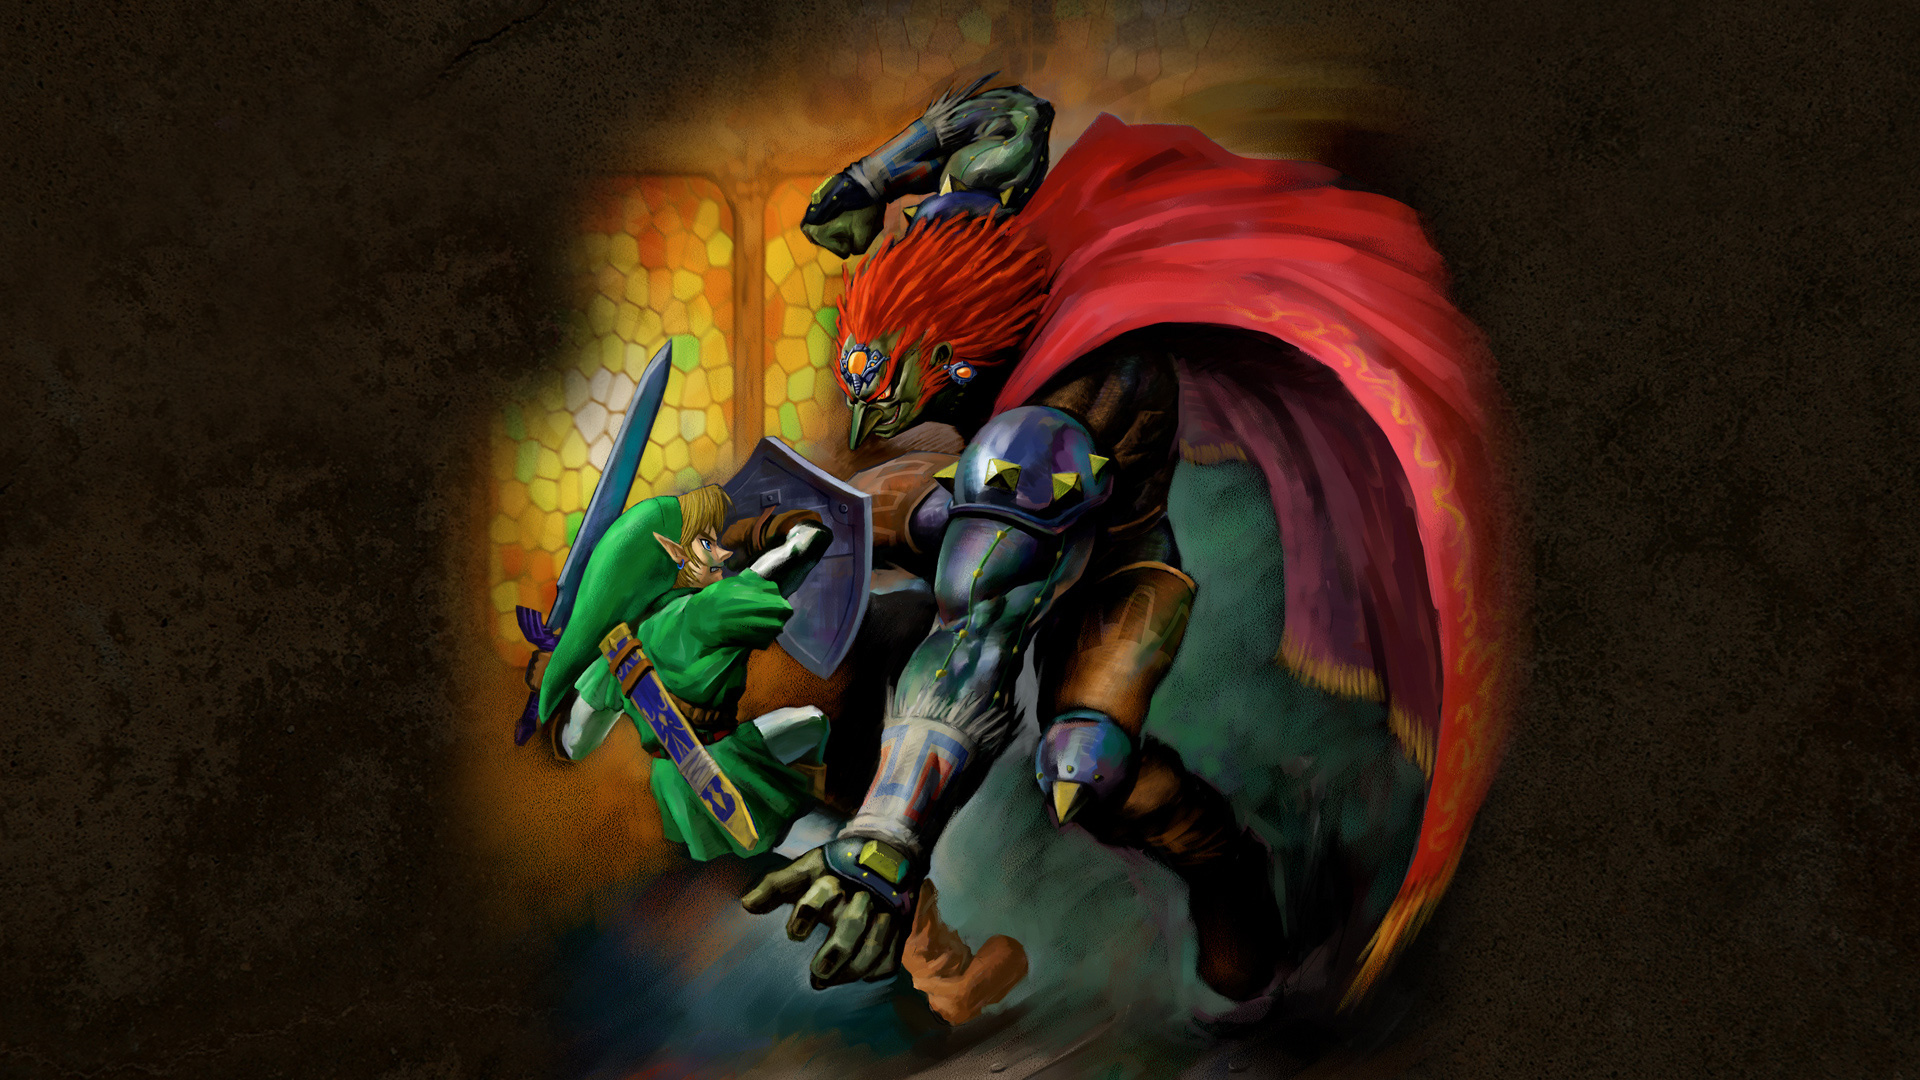 Proto:The Legend of Zelda: Ocarina of Time Master Quest - The